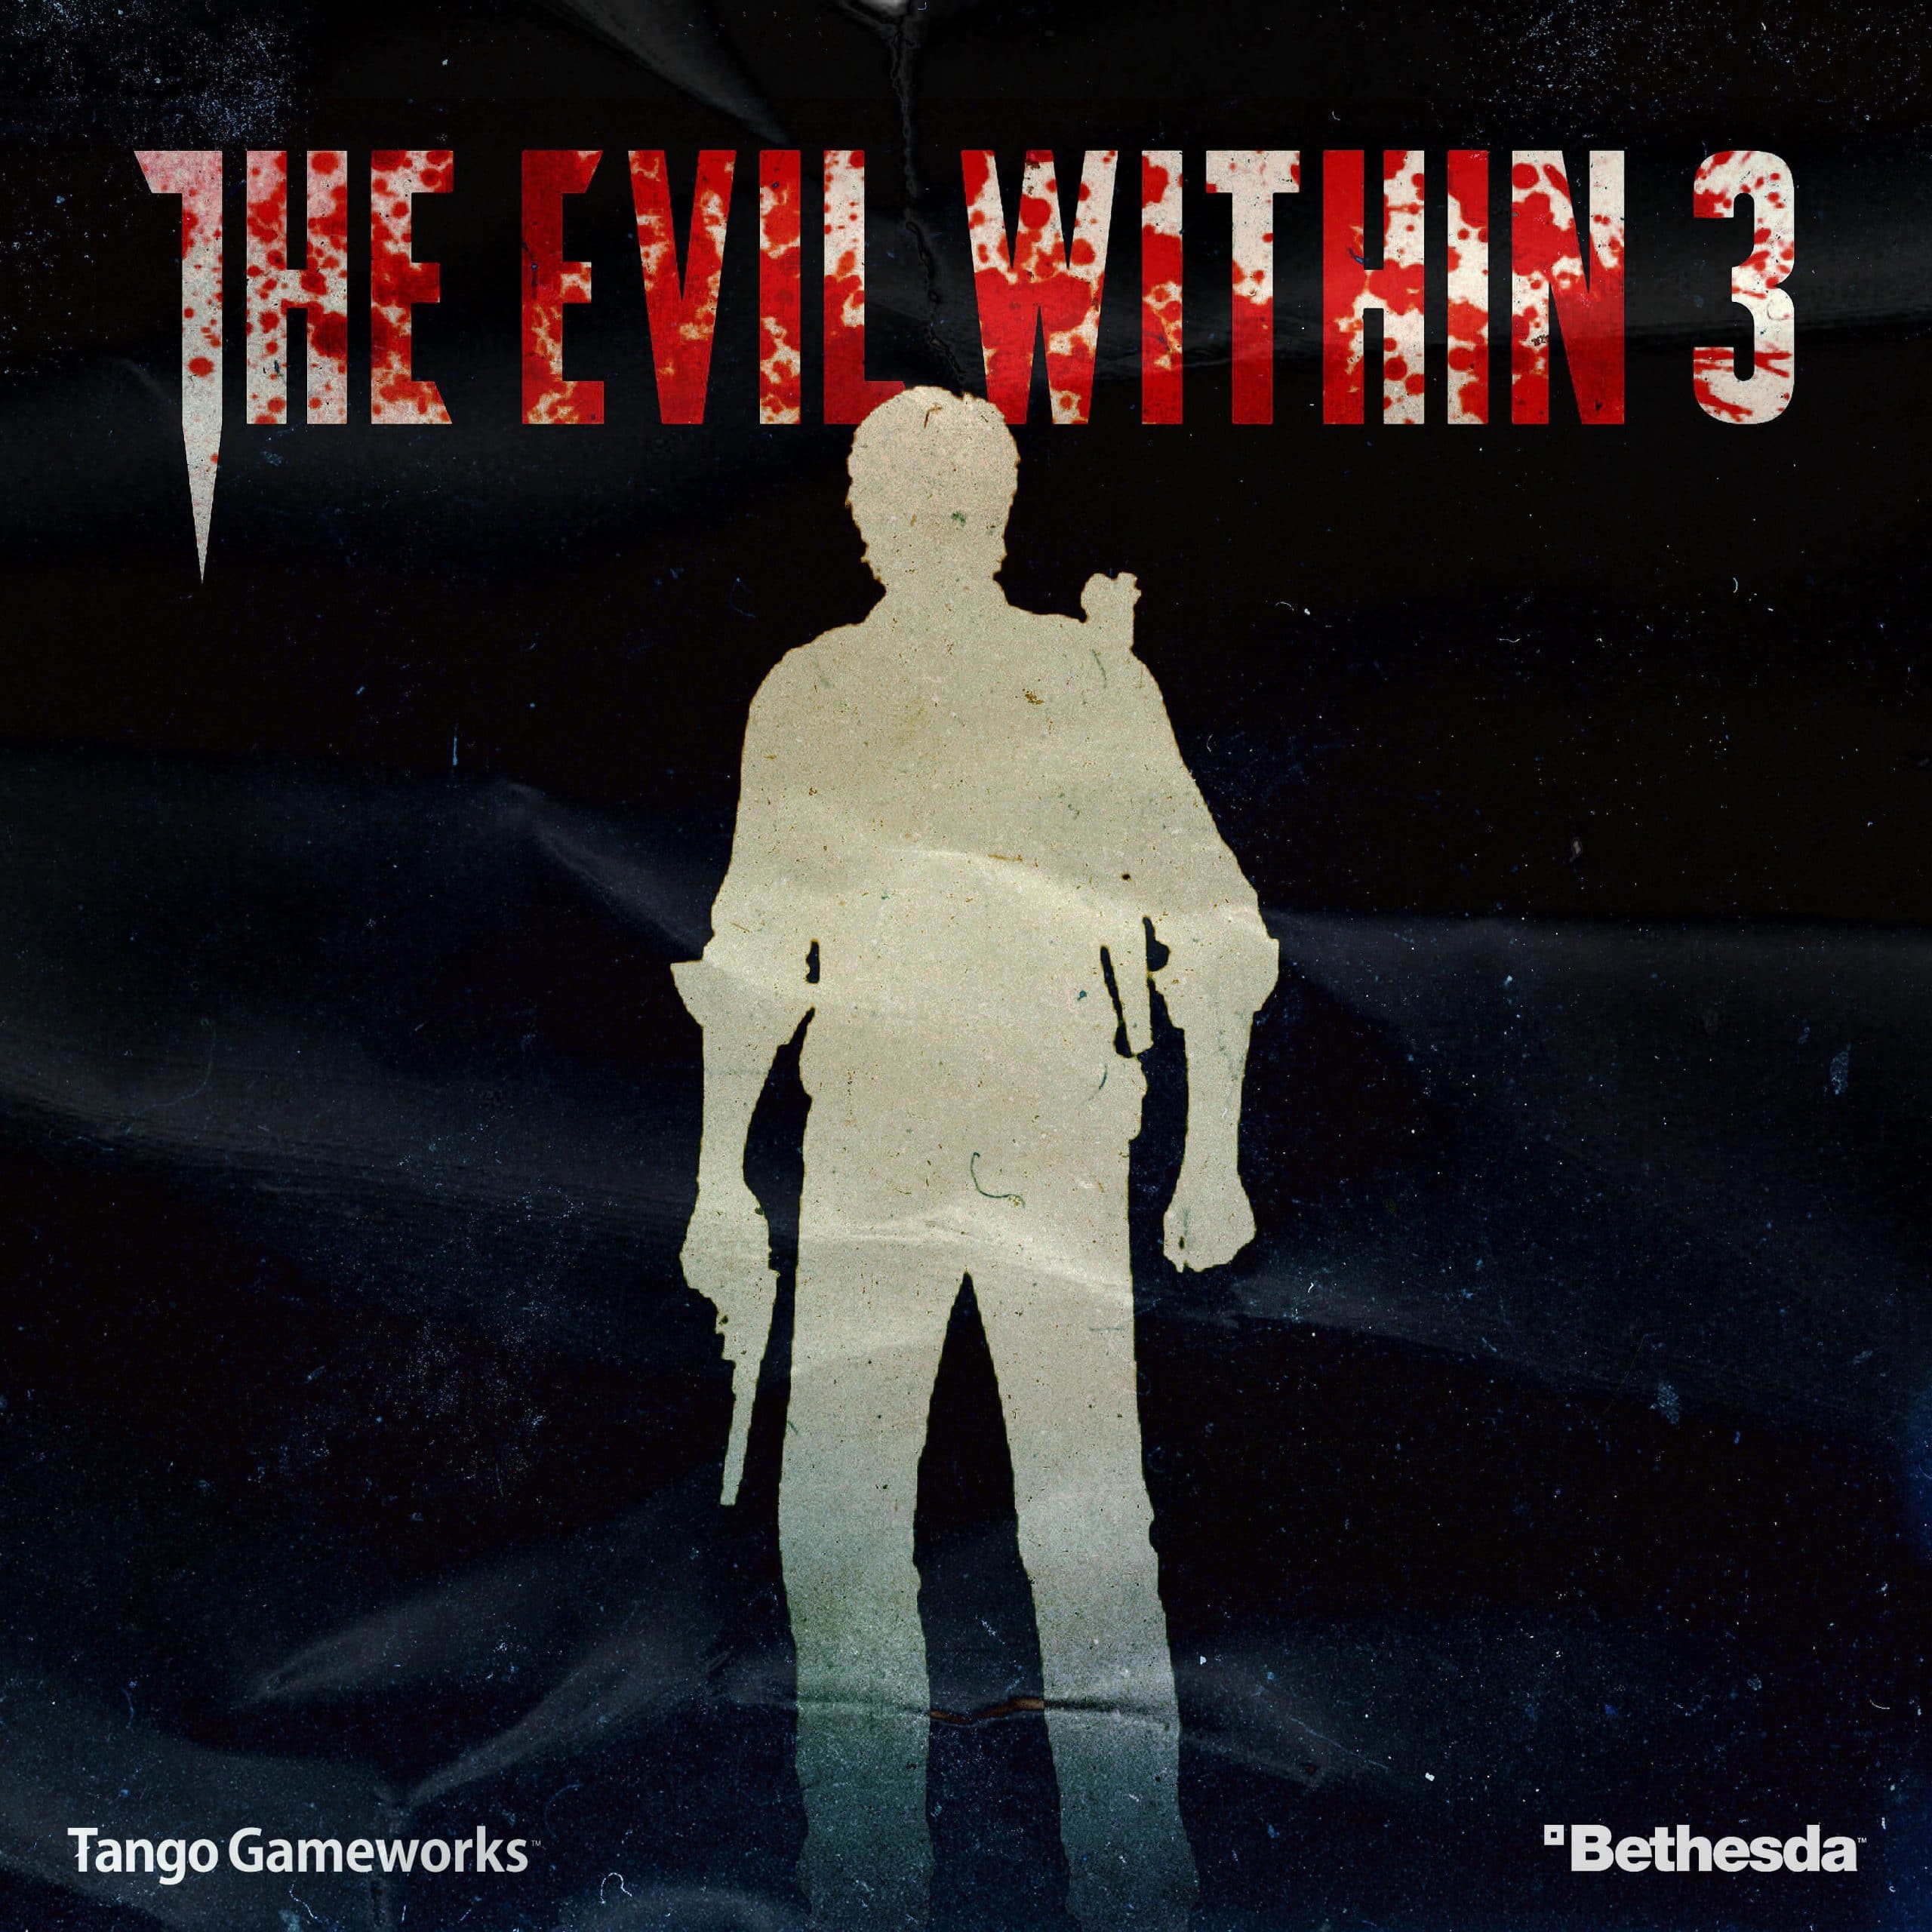 the evil within video game download